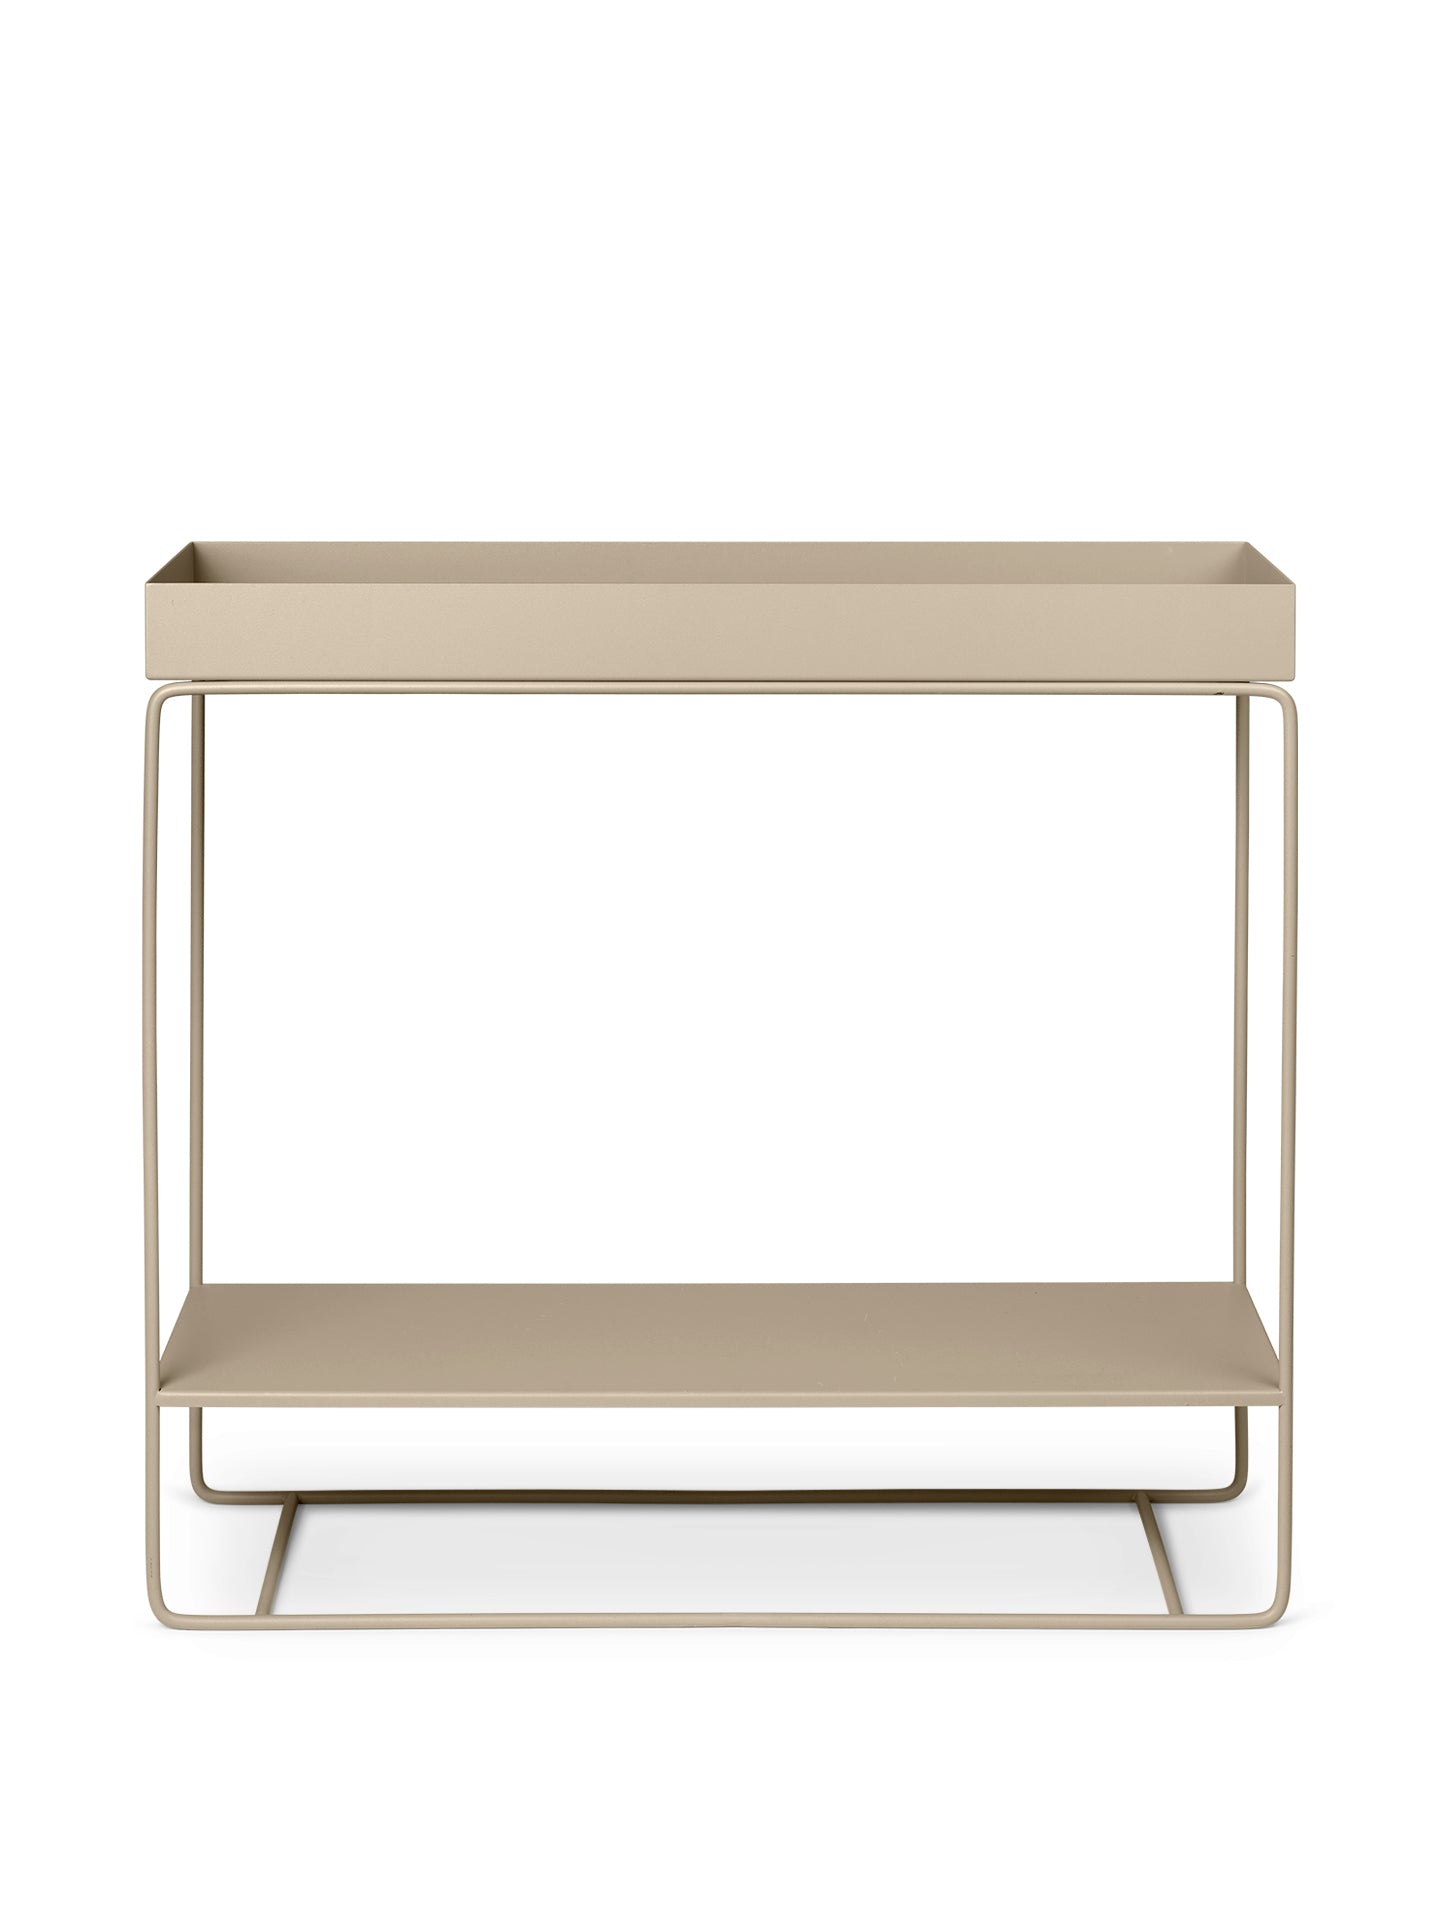 Plant Box - Two Tier by ferm LIVING